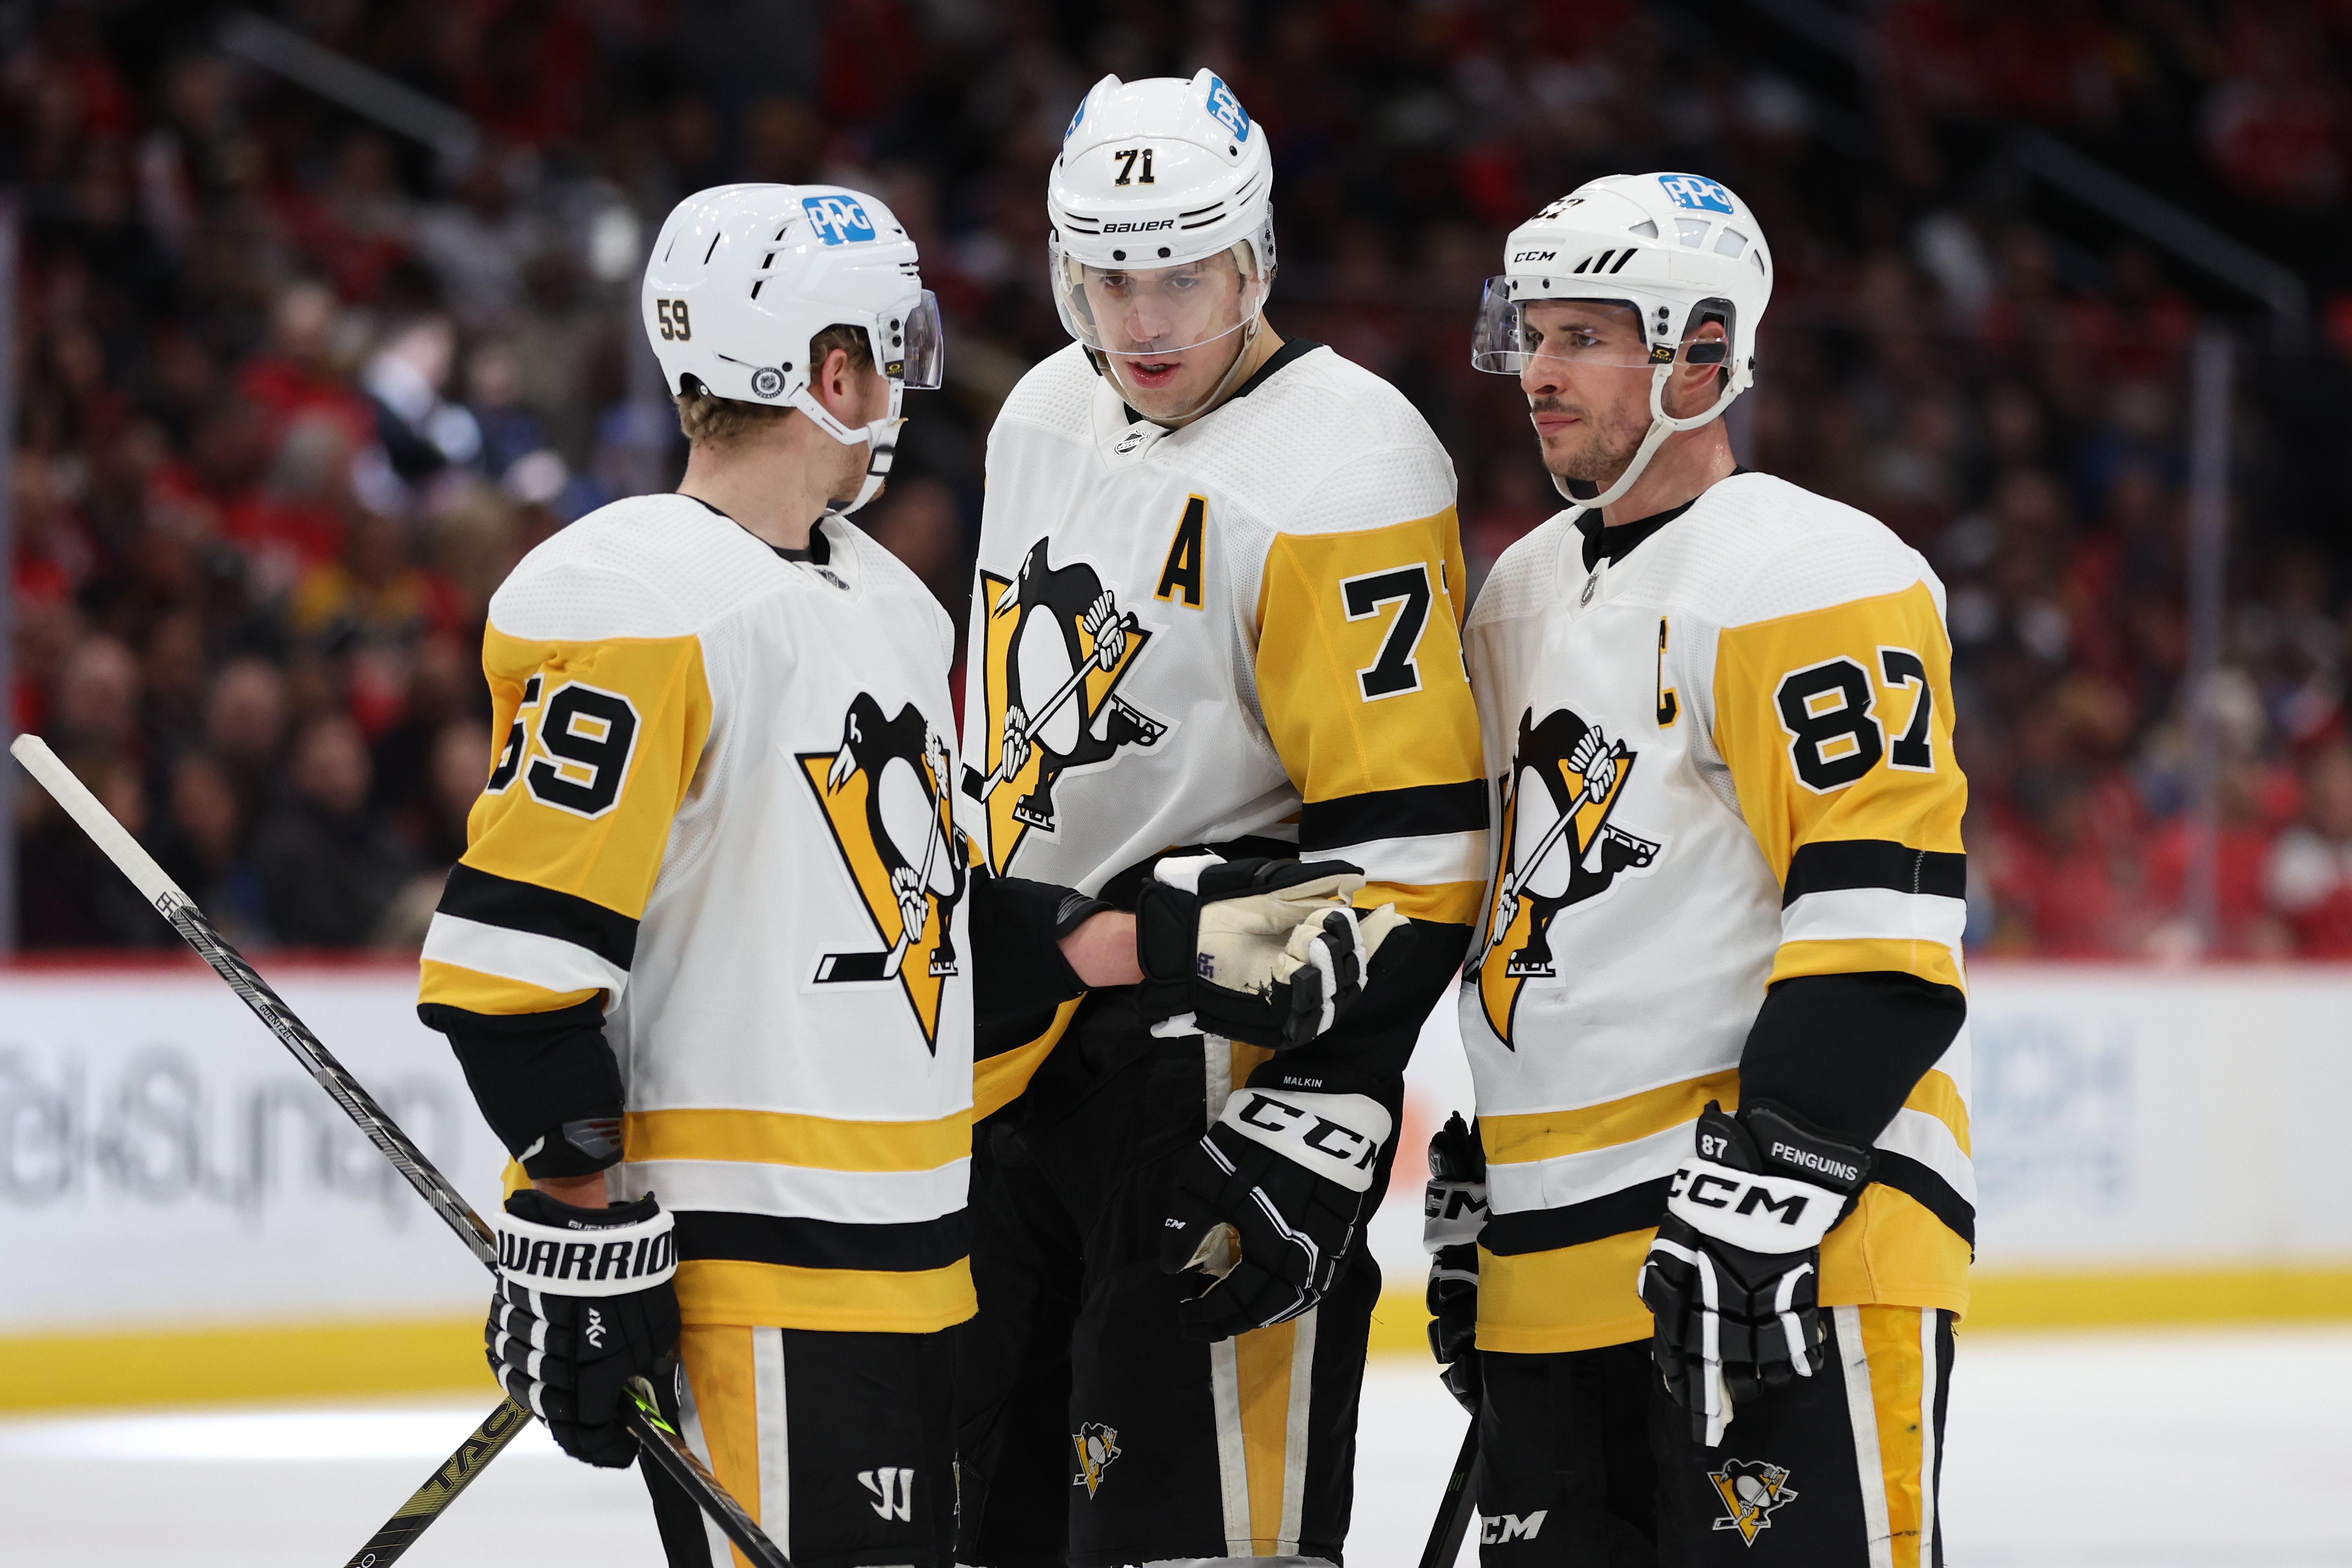 Guentzel, Malkin, and Crosby huddle and talk on the ice.